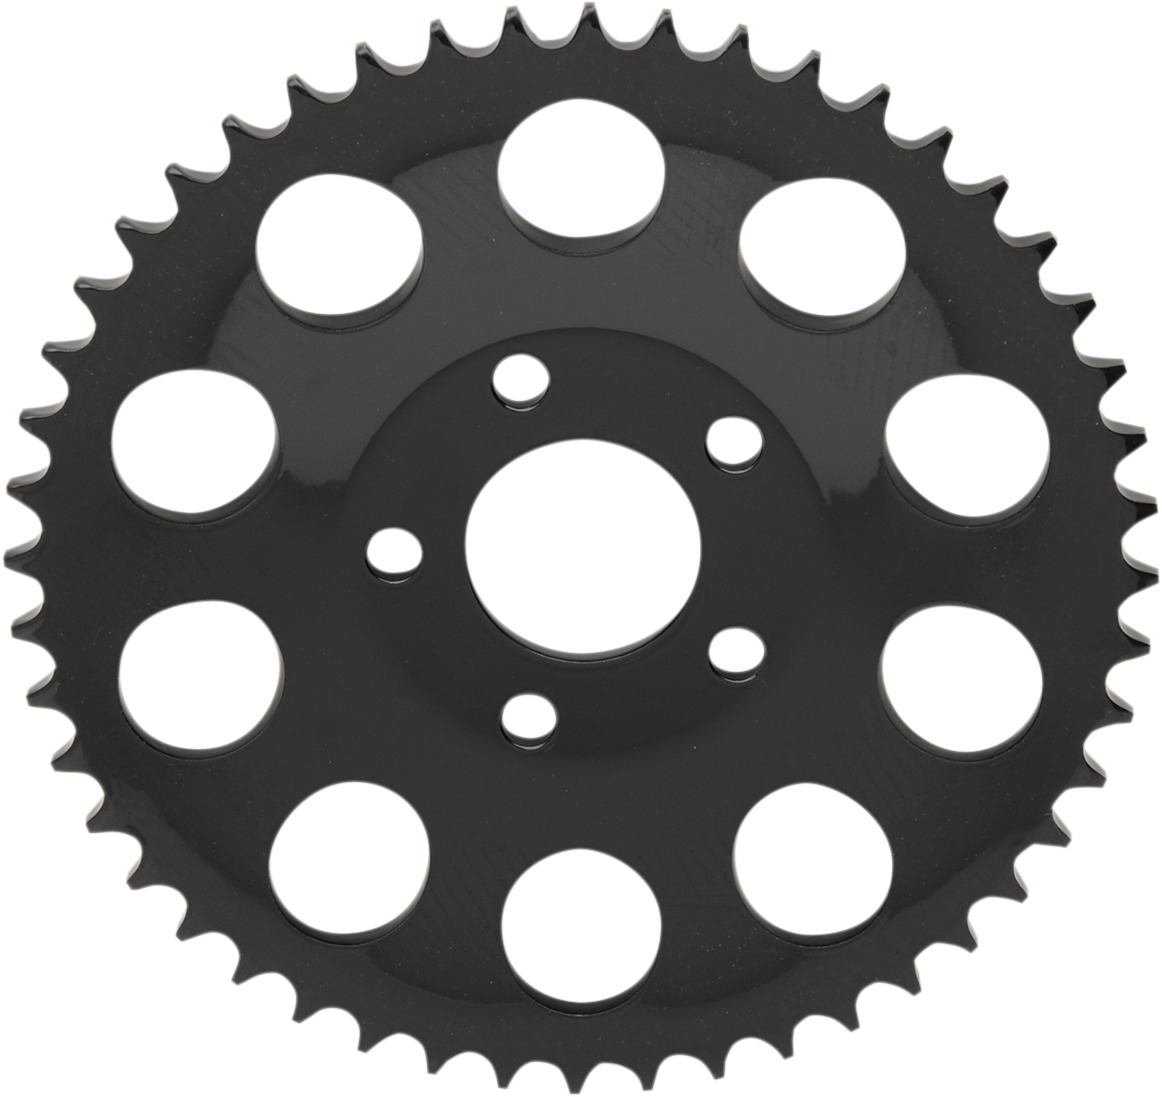 Carbon Steel 48T Drive Sprocket Gloss Black Offset 0.46" - Click Image to Close